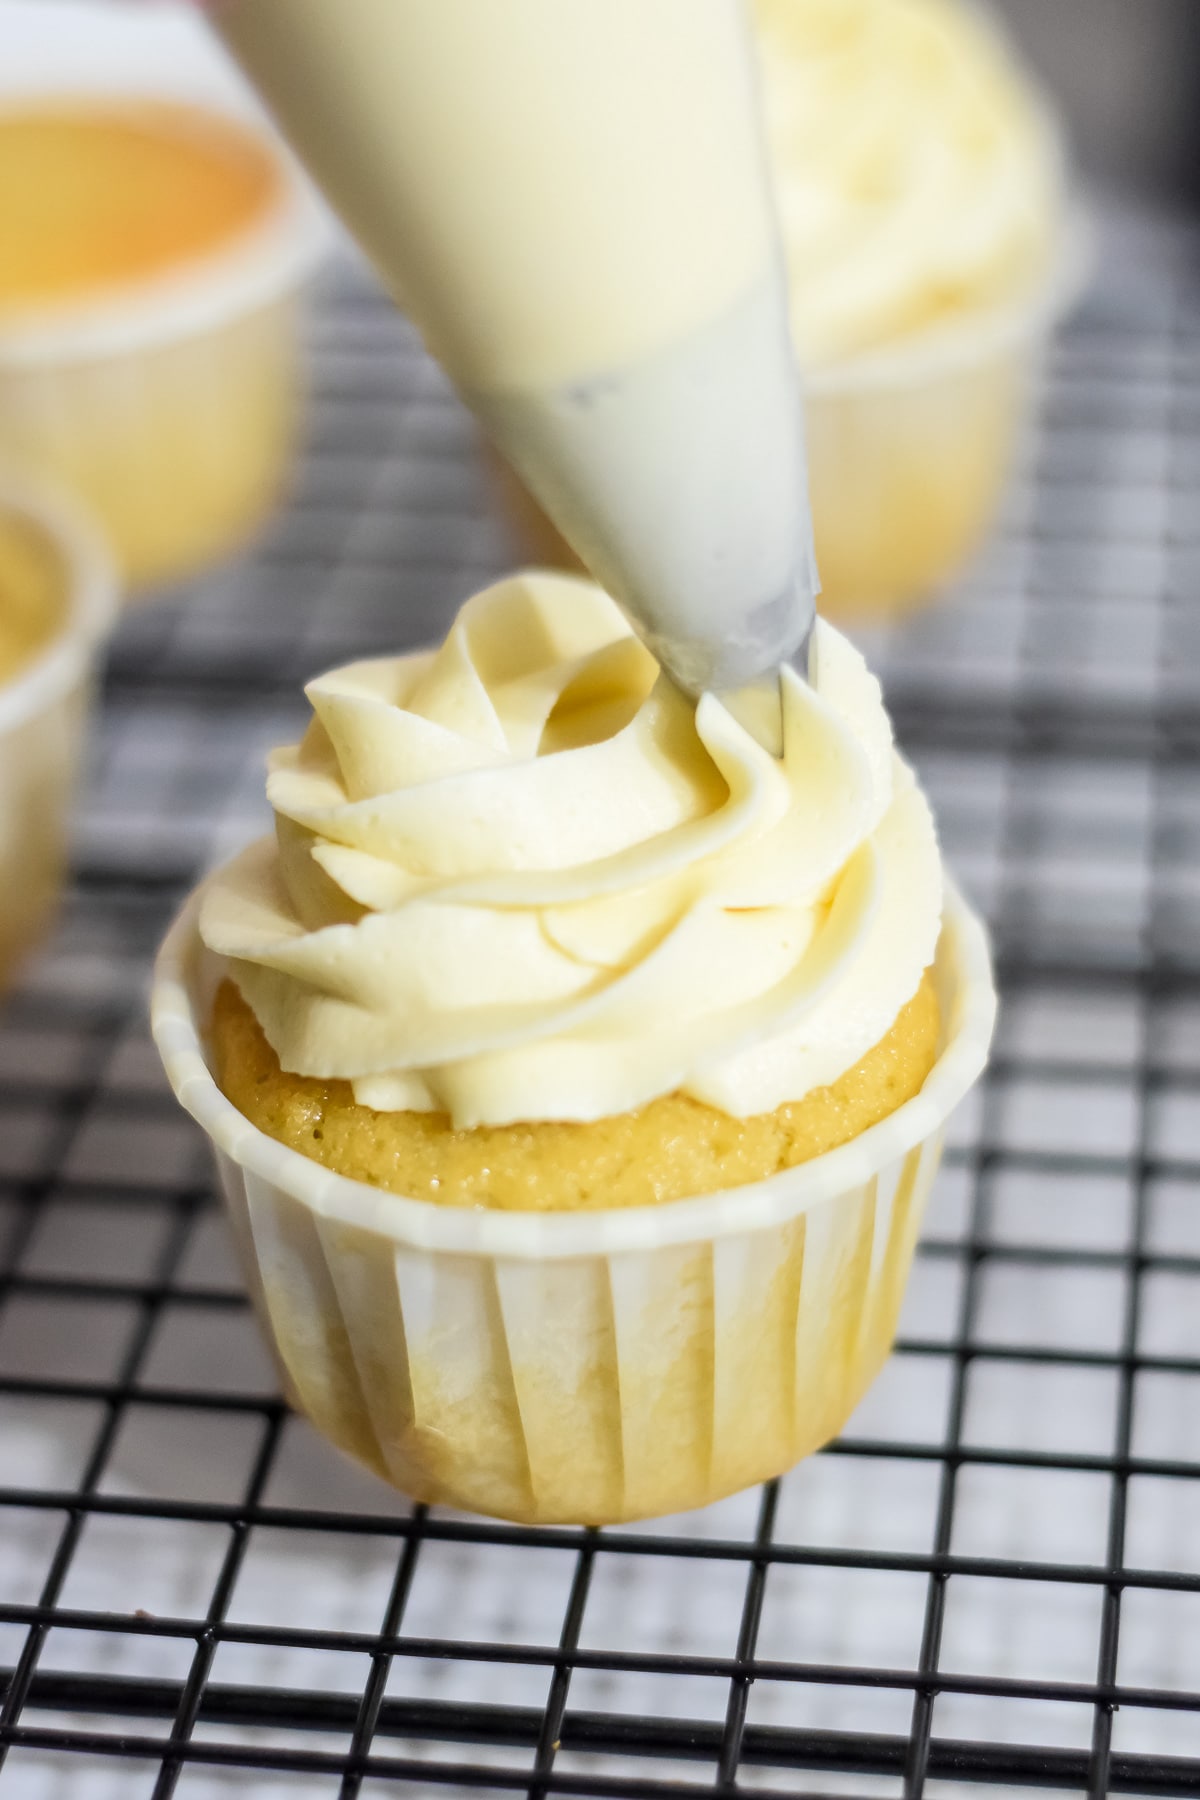 Baileys irish cream frosting piped from a piping bag onto a cupcake on a wire rack